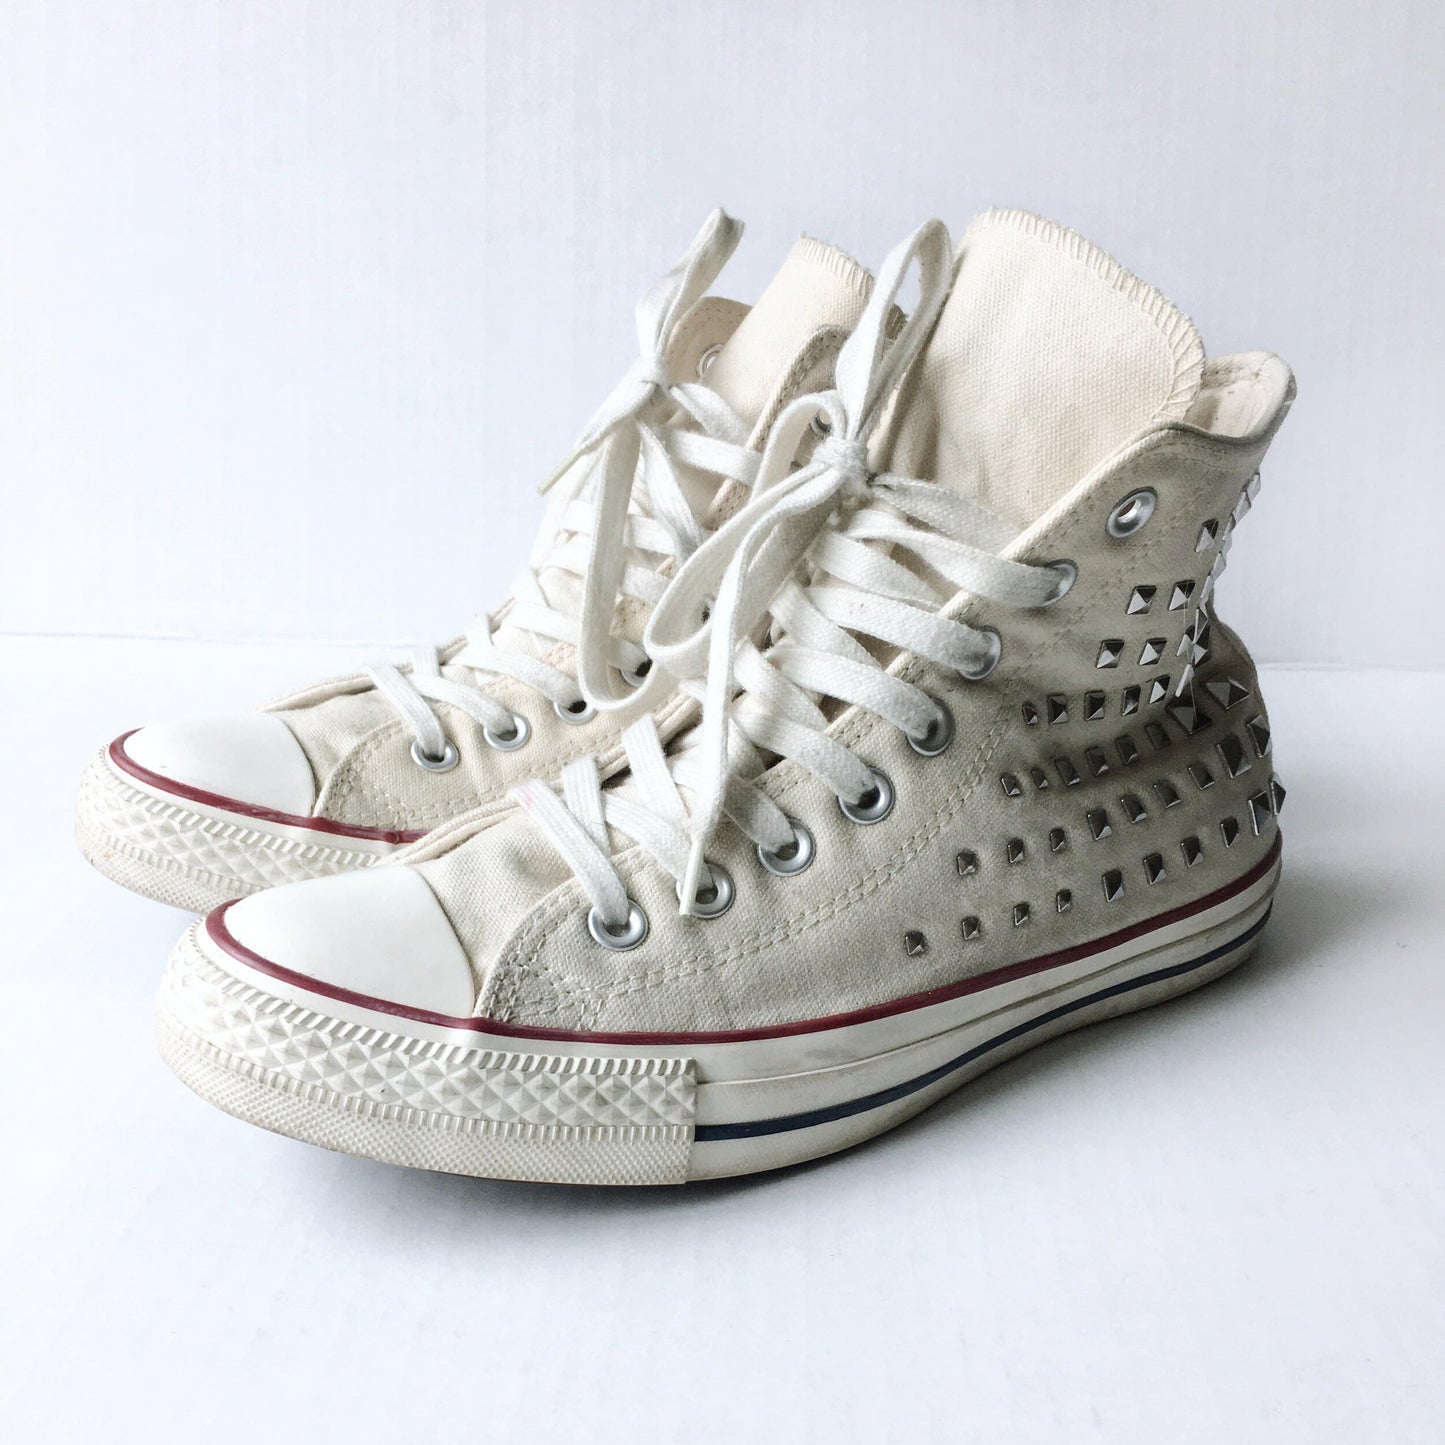 Converse All Star Studded High Tops - size 9